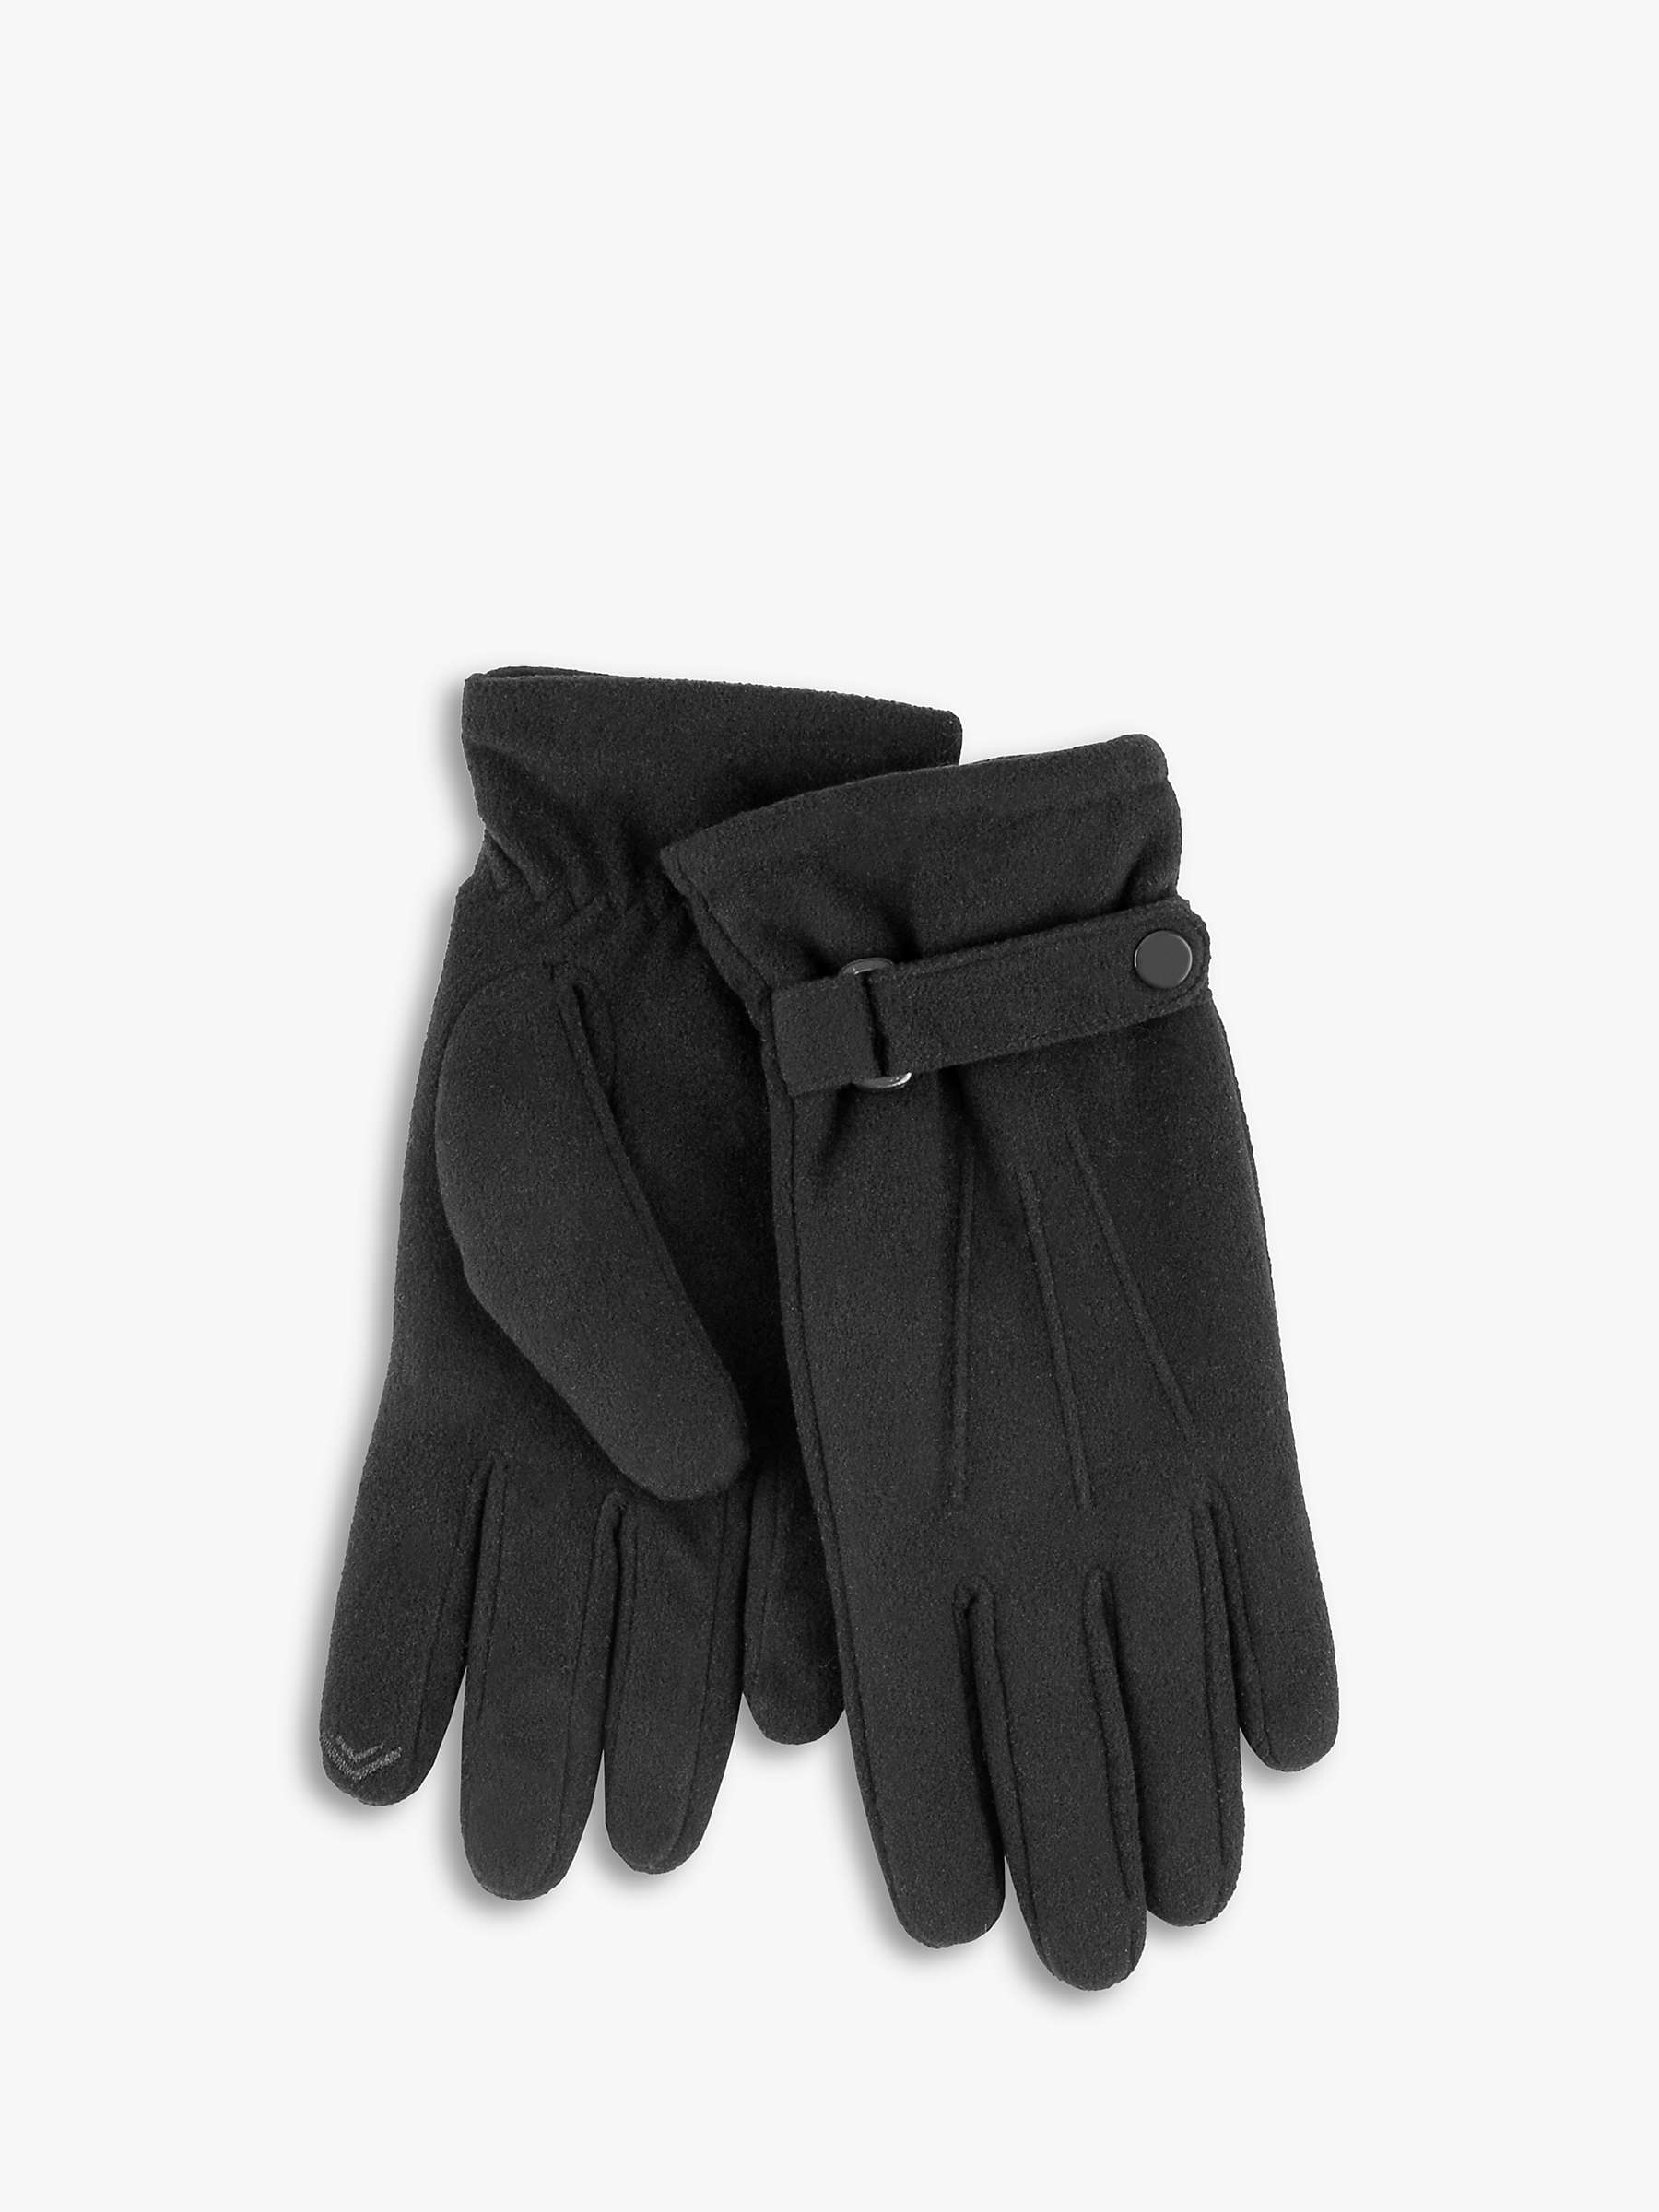 Buy totes Fleece Smartouch Gloves Online at johnlewis.com